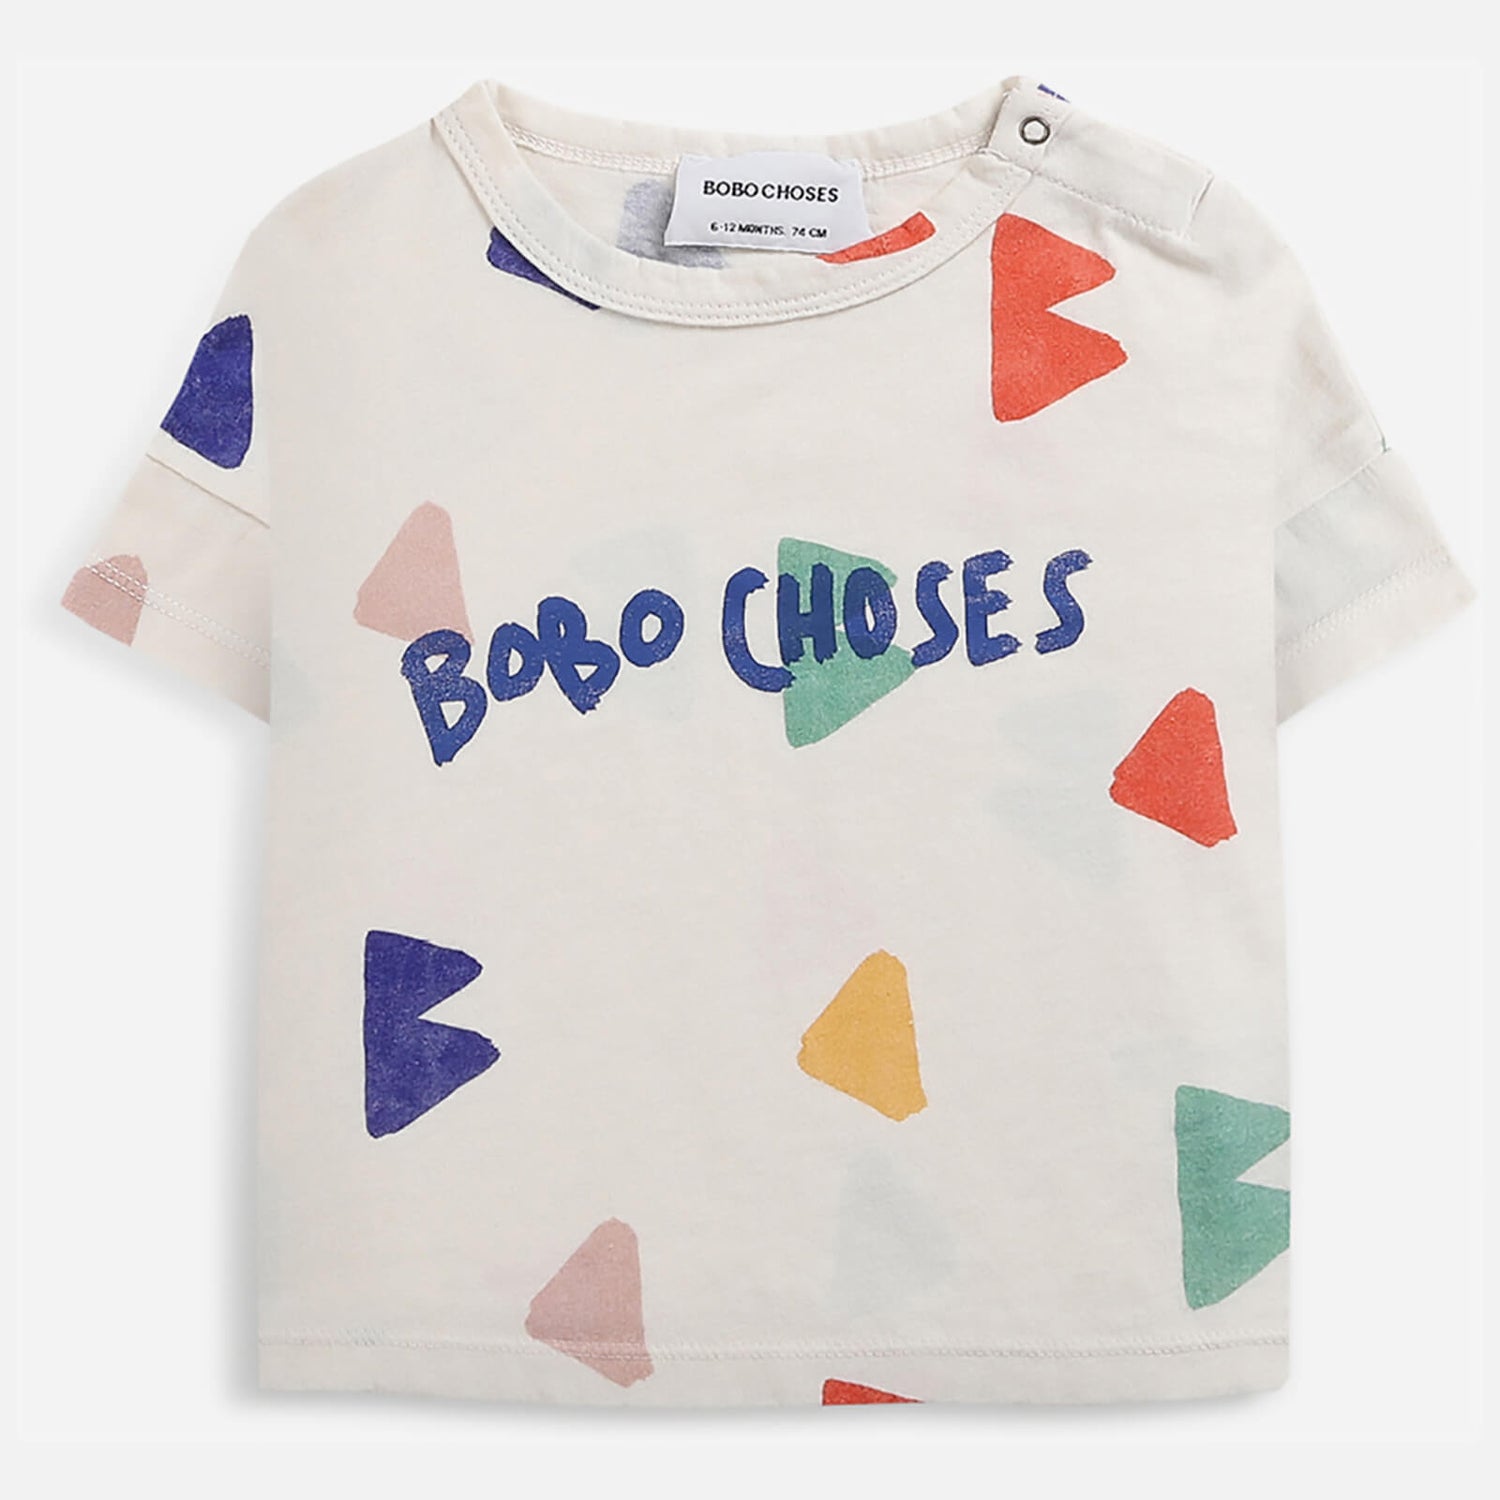 BoBo Choses Baby Logo All Over Short Sleeve T-Shirt - 3-6 months